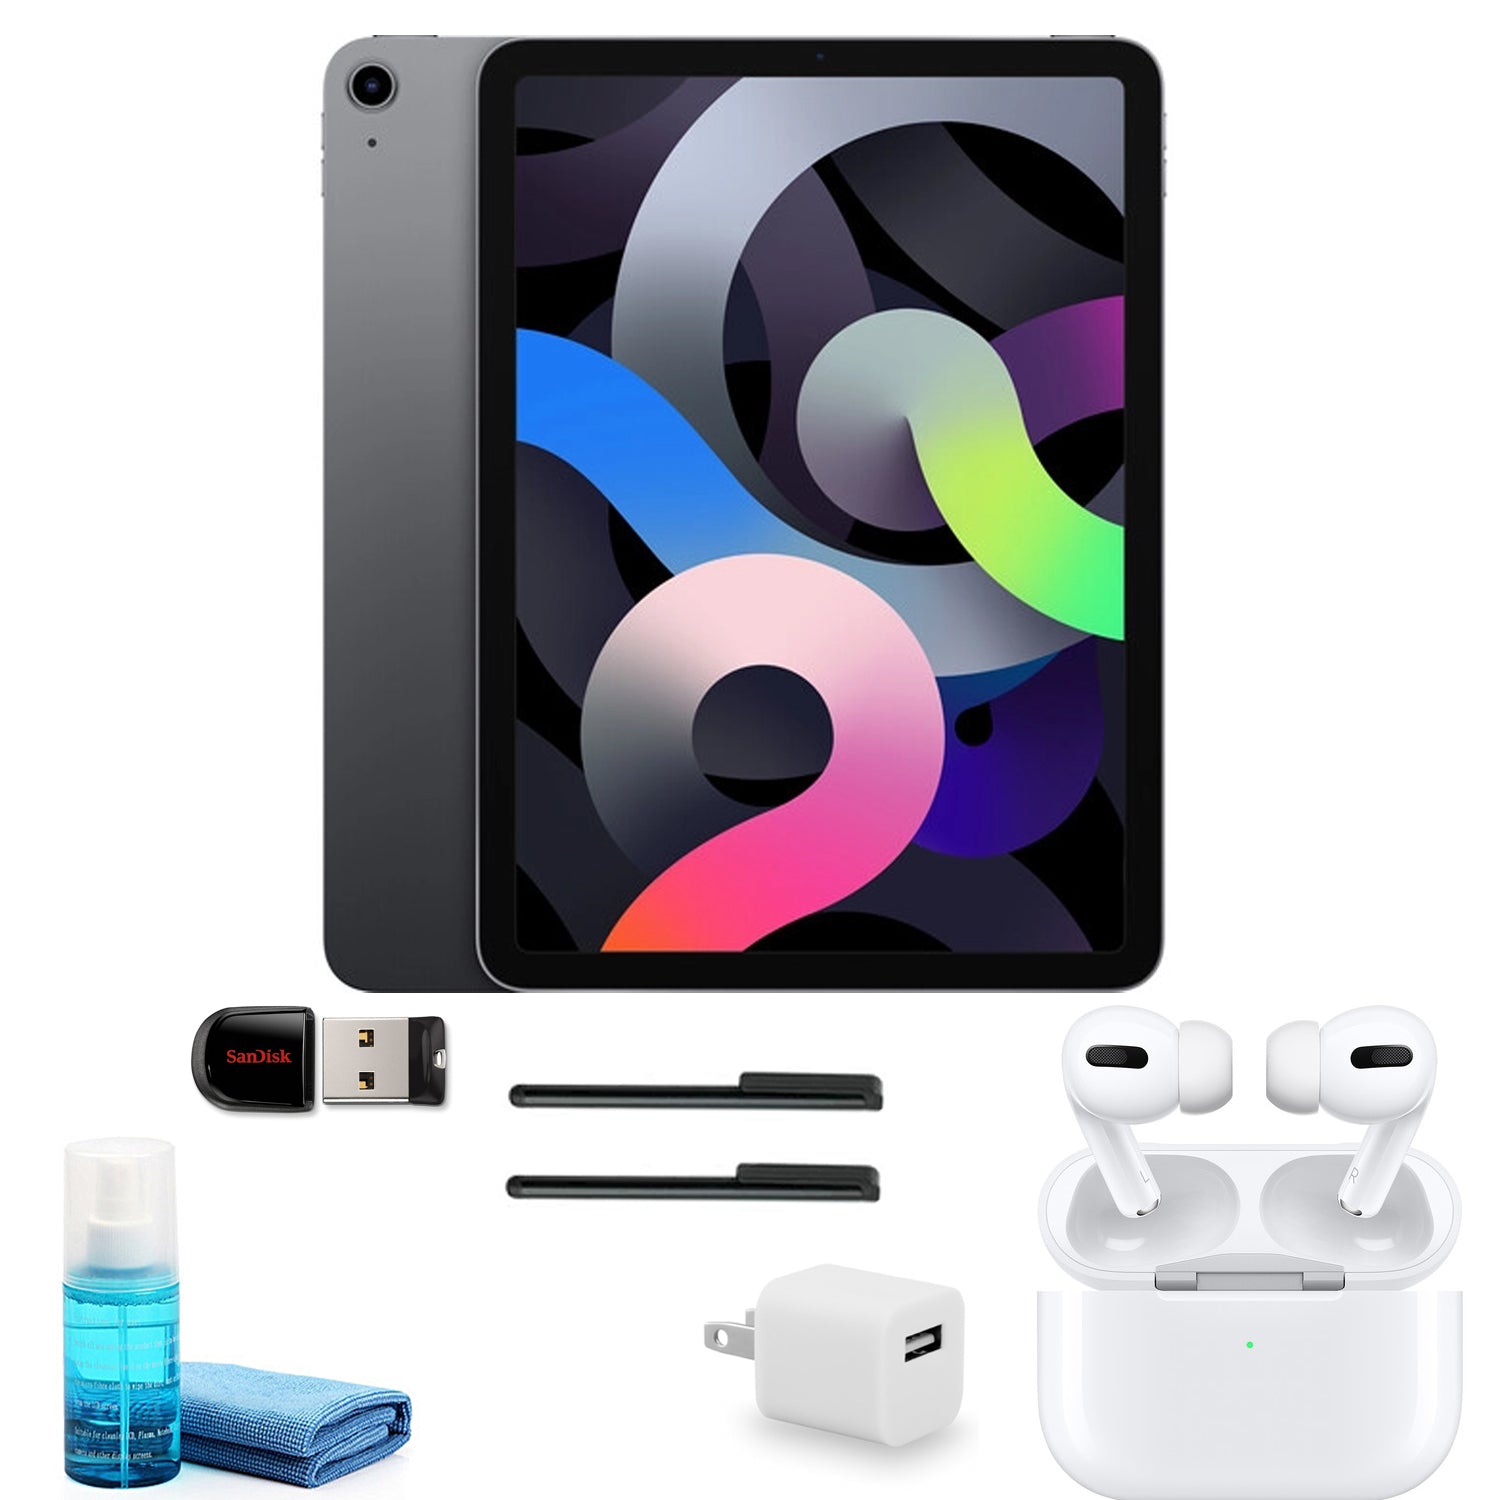 Apple iPad Air 10.9 Inch (64GB, Space Gray) with Apple AirPods Pro and more